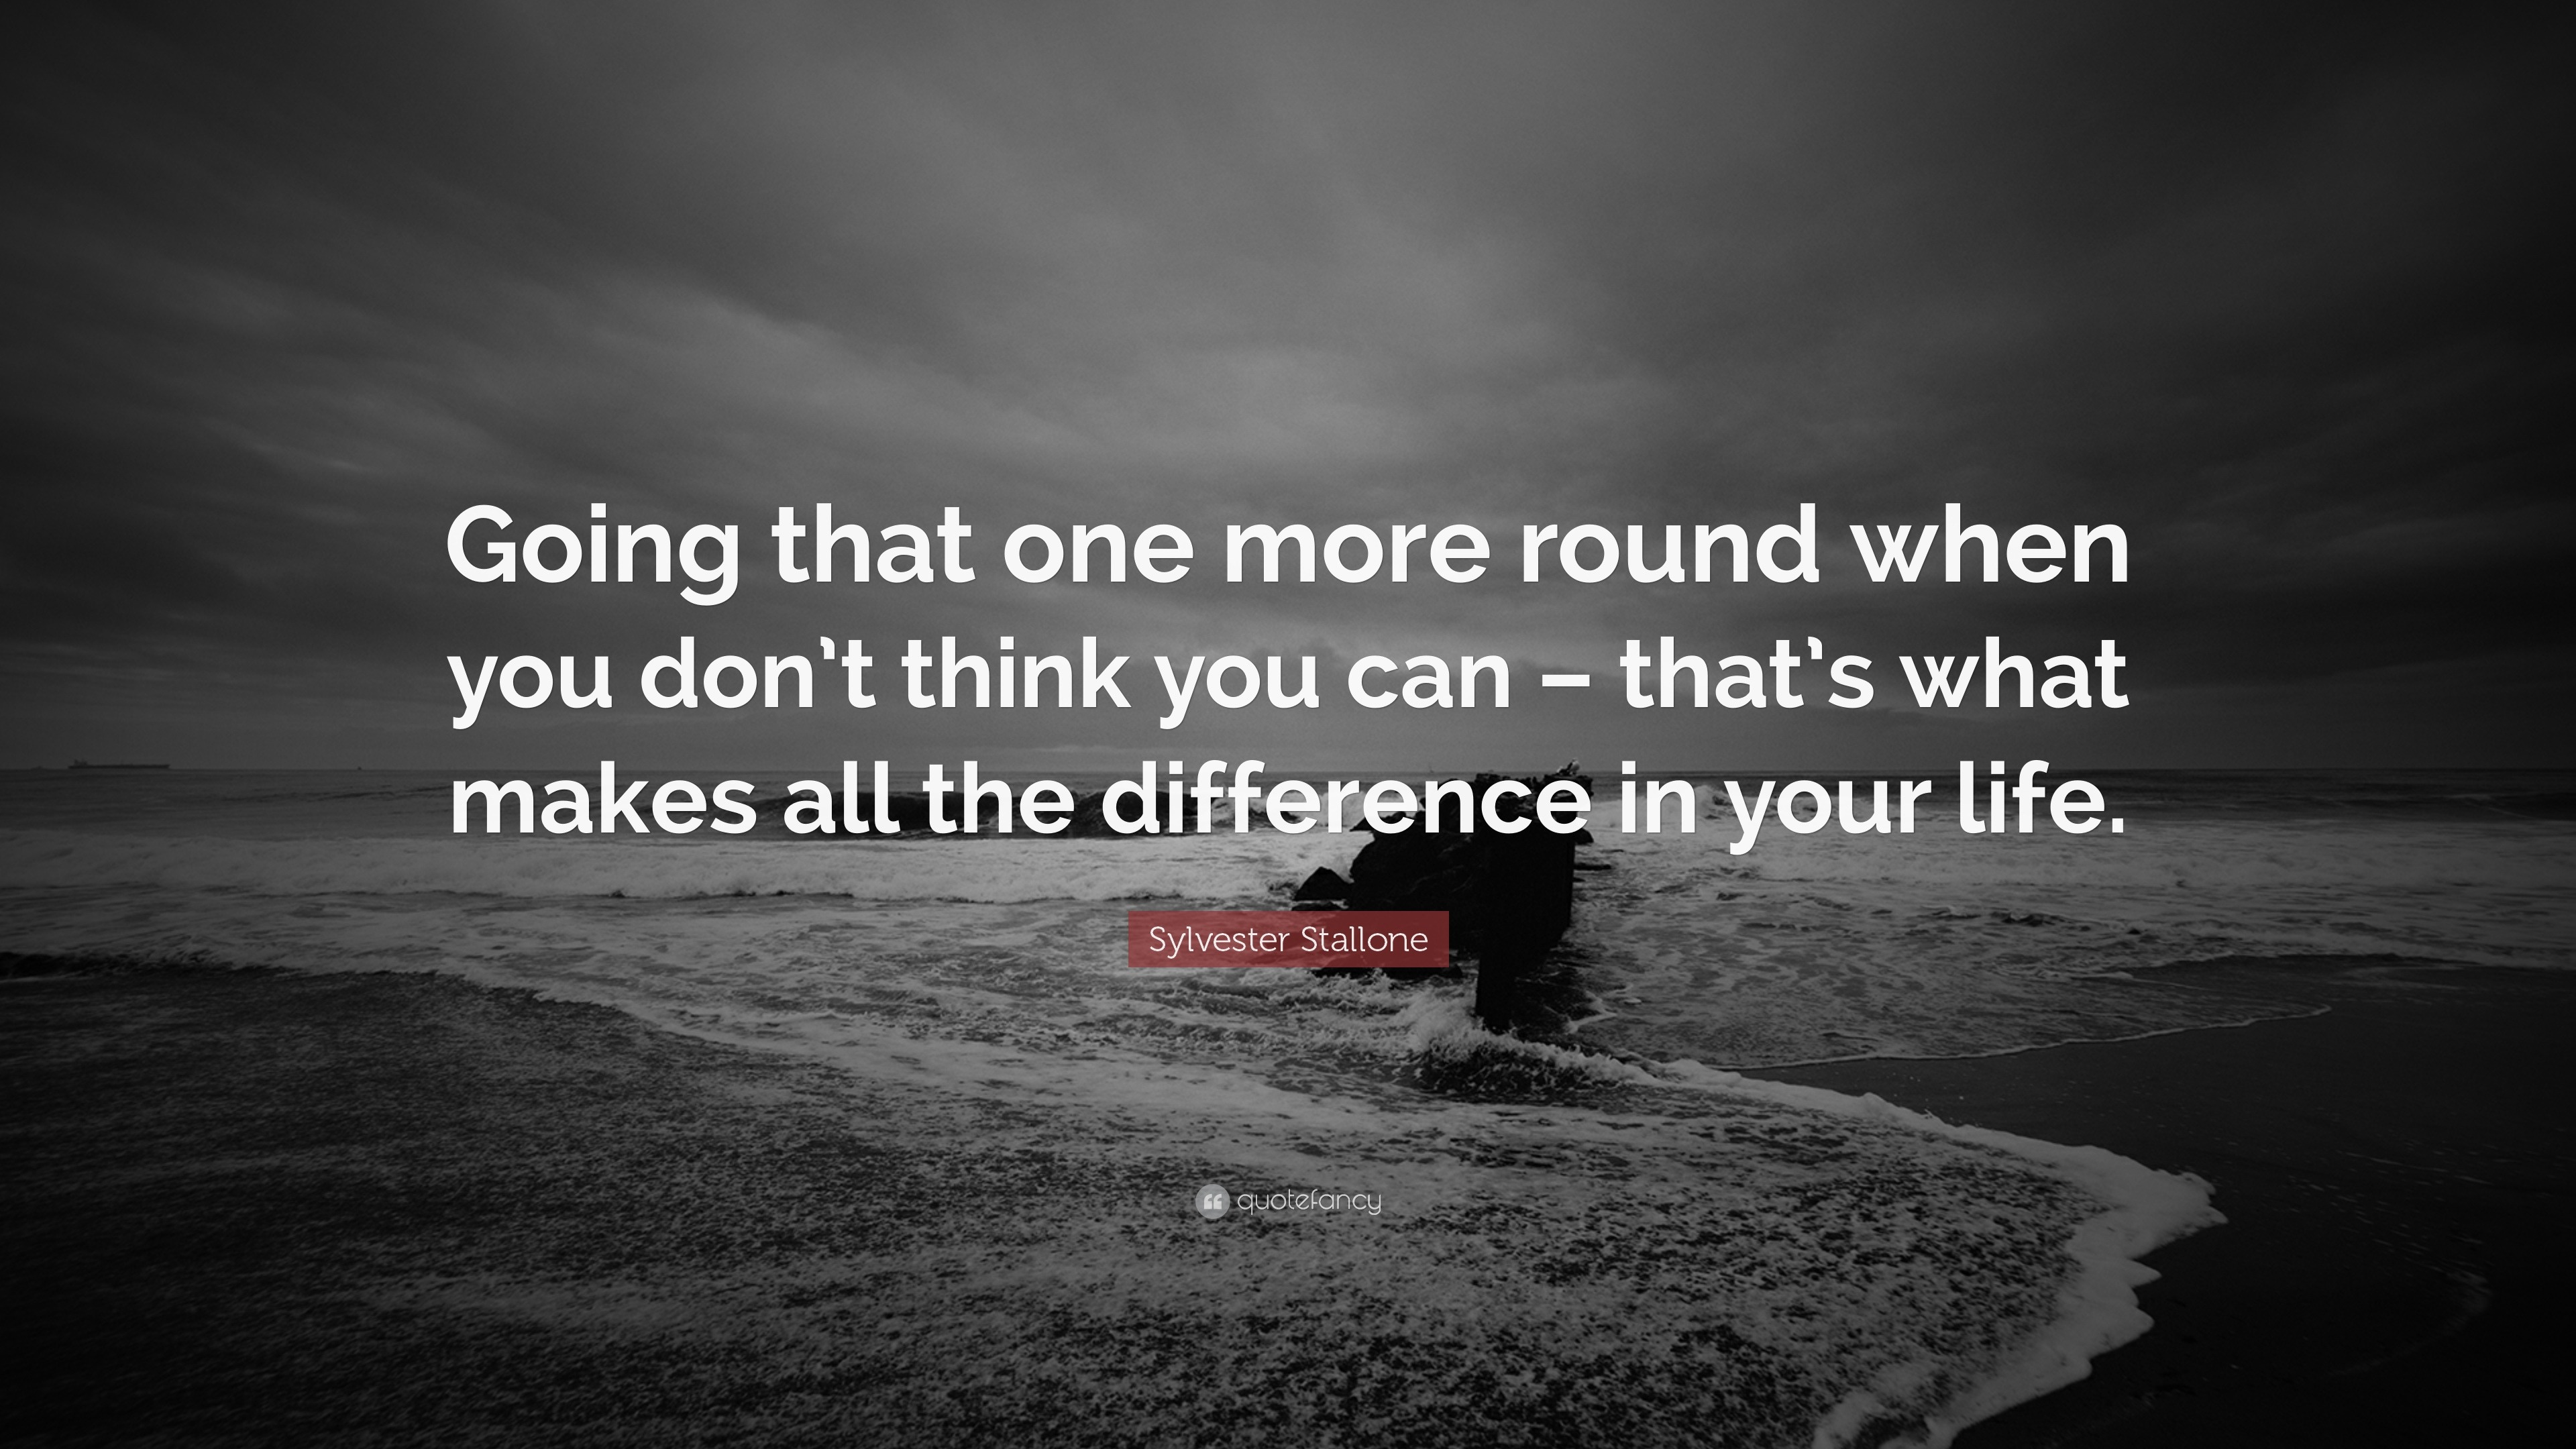 Sylvester Stallone Quote: “Going that one more round when you don’t